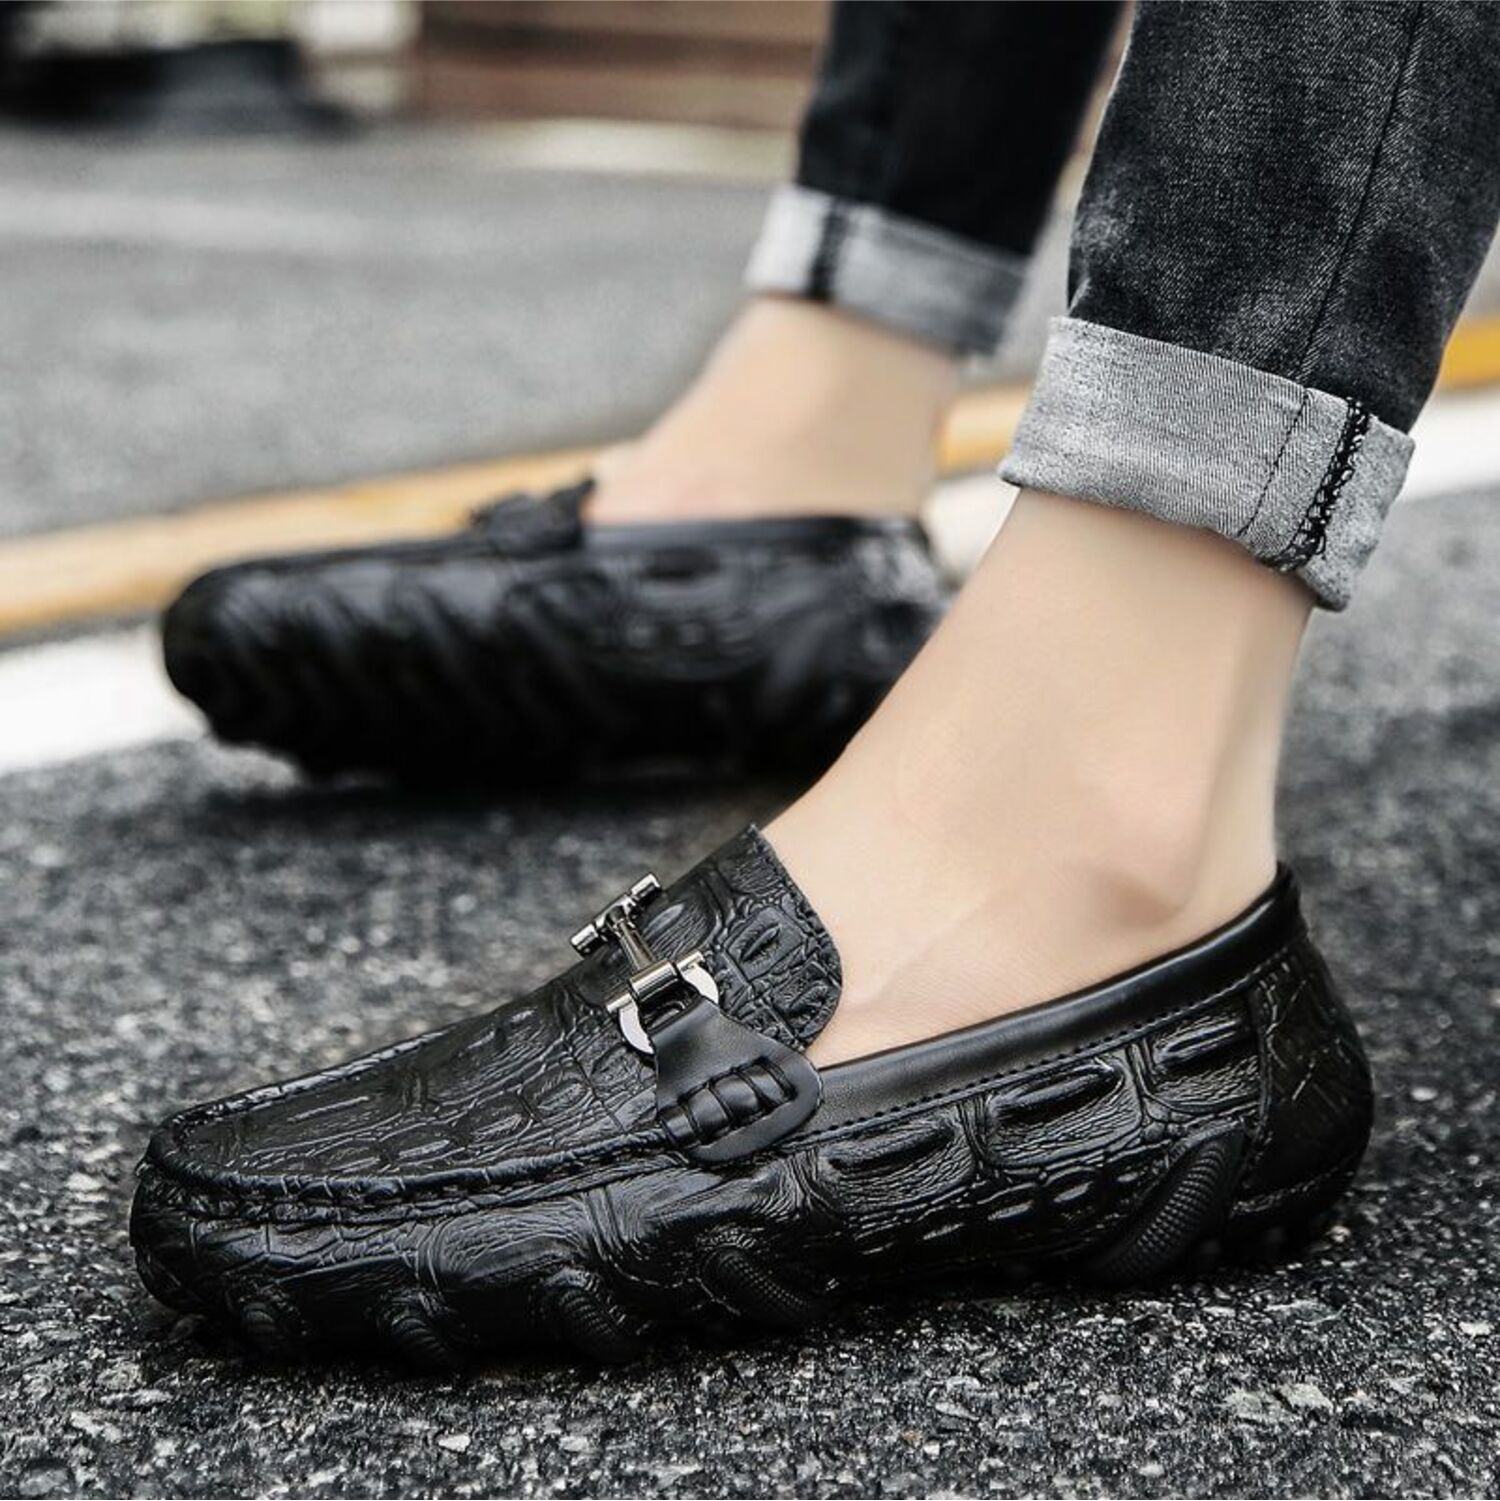 Octopus Style Shoes